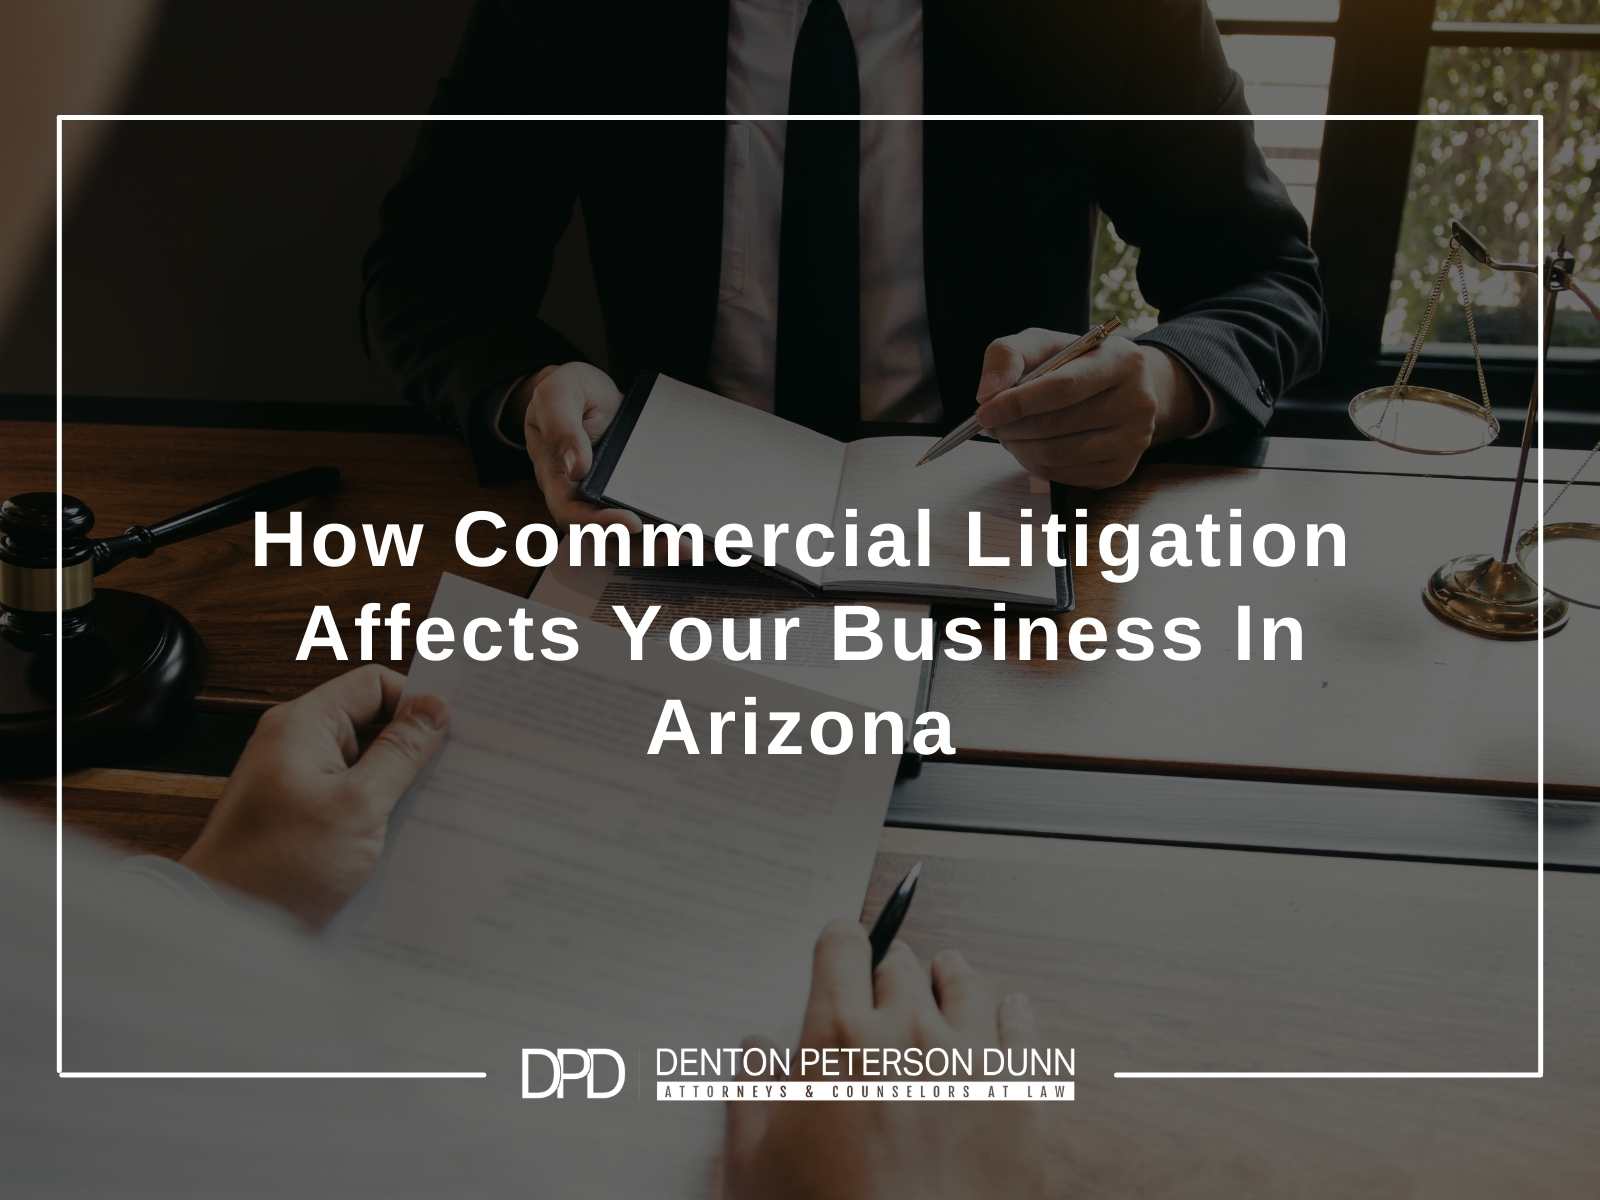 How Commercial Litigation Affects Your Business In Arizona